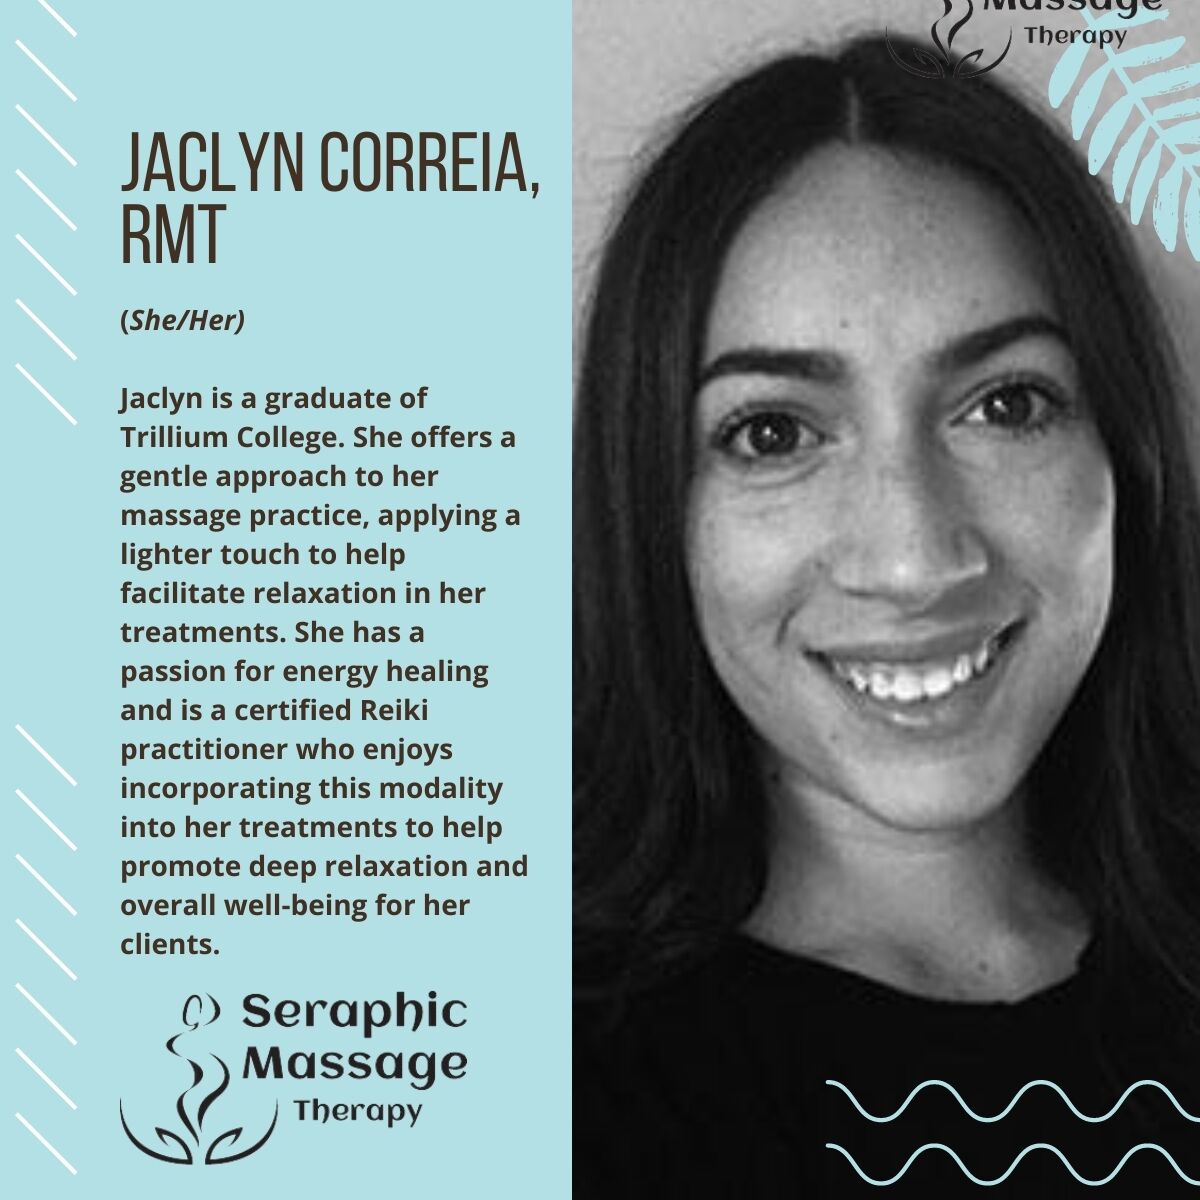 Have you tried Reiki with Jaclyn?

#RMT #stressrelease #treatyourselftohealth #roncesvalles #parkdale #torontoRMT #brocktonvillage #the6ix #collegestreet #JunctionTO #HighPark #reiki